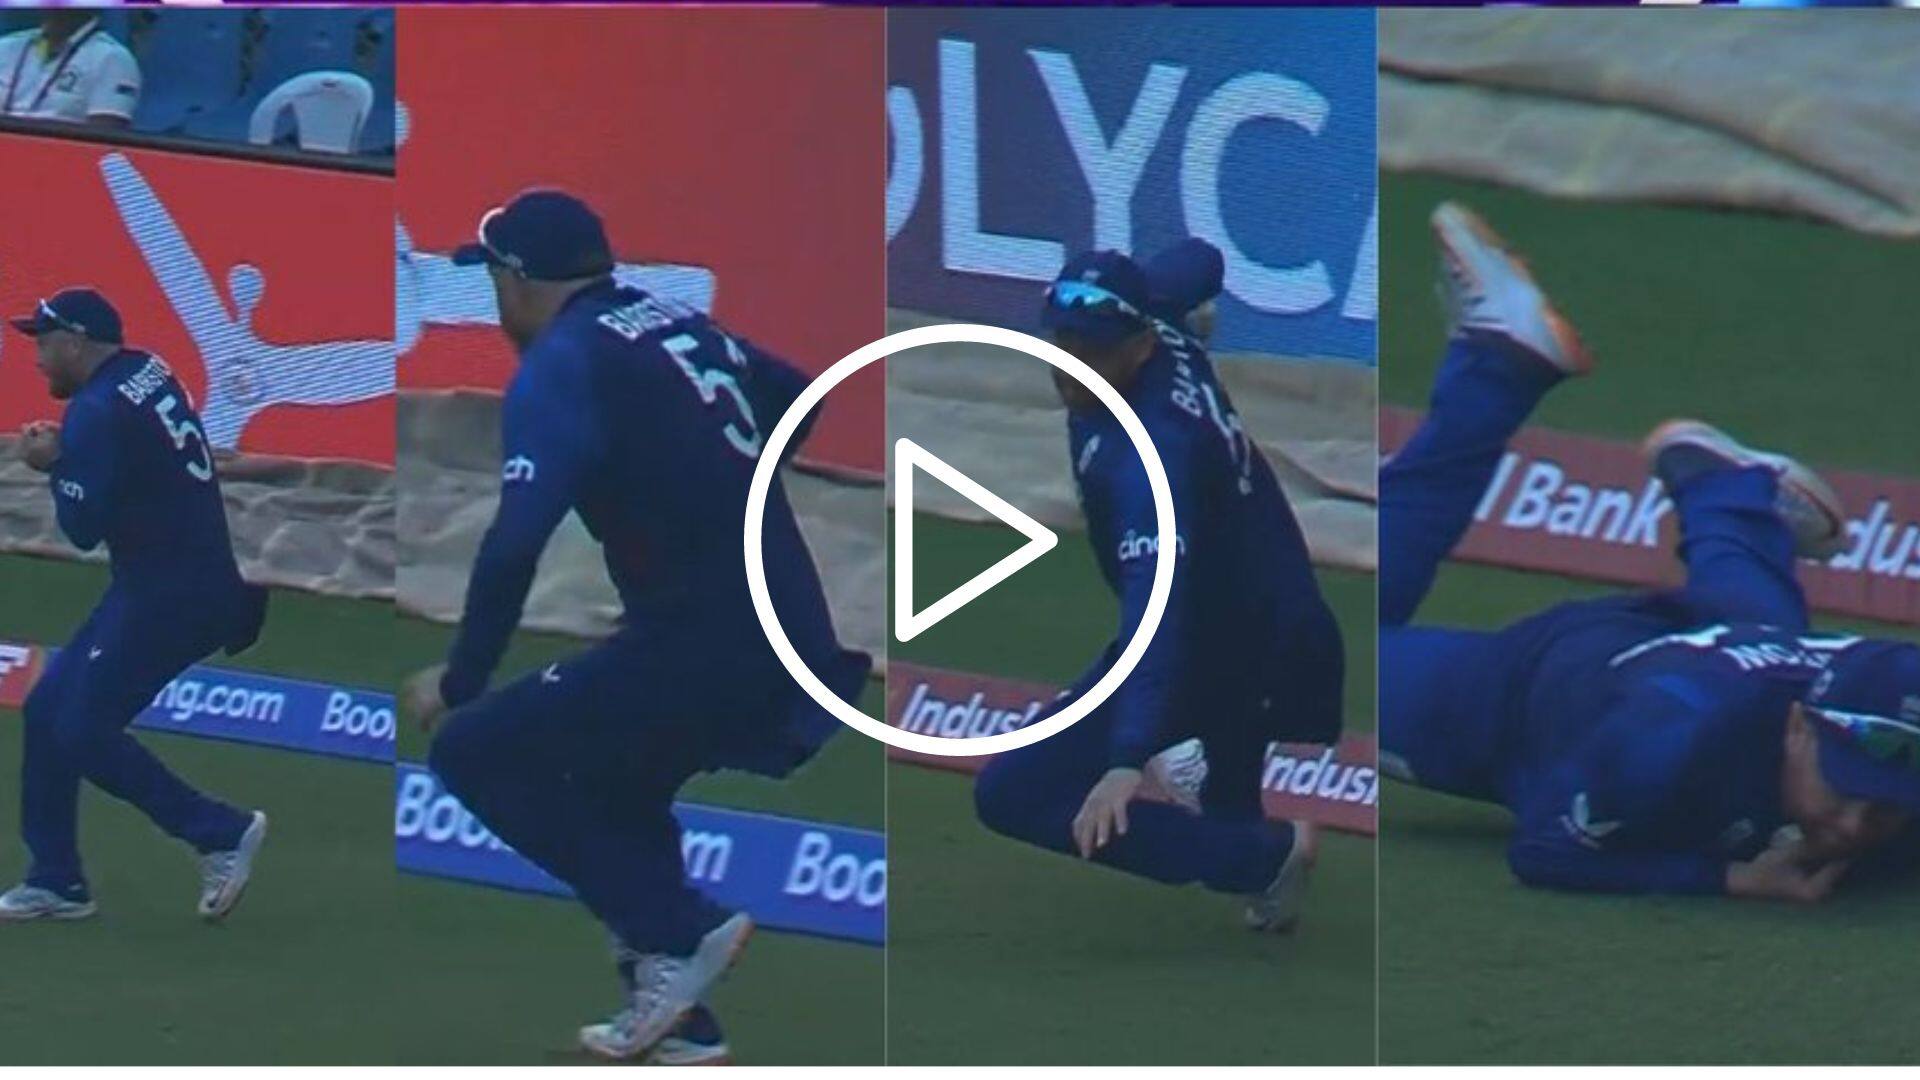 [Watch] Jonny Bairstow Falls Awkwardly, Gives Injury Scare While Taking A Skier